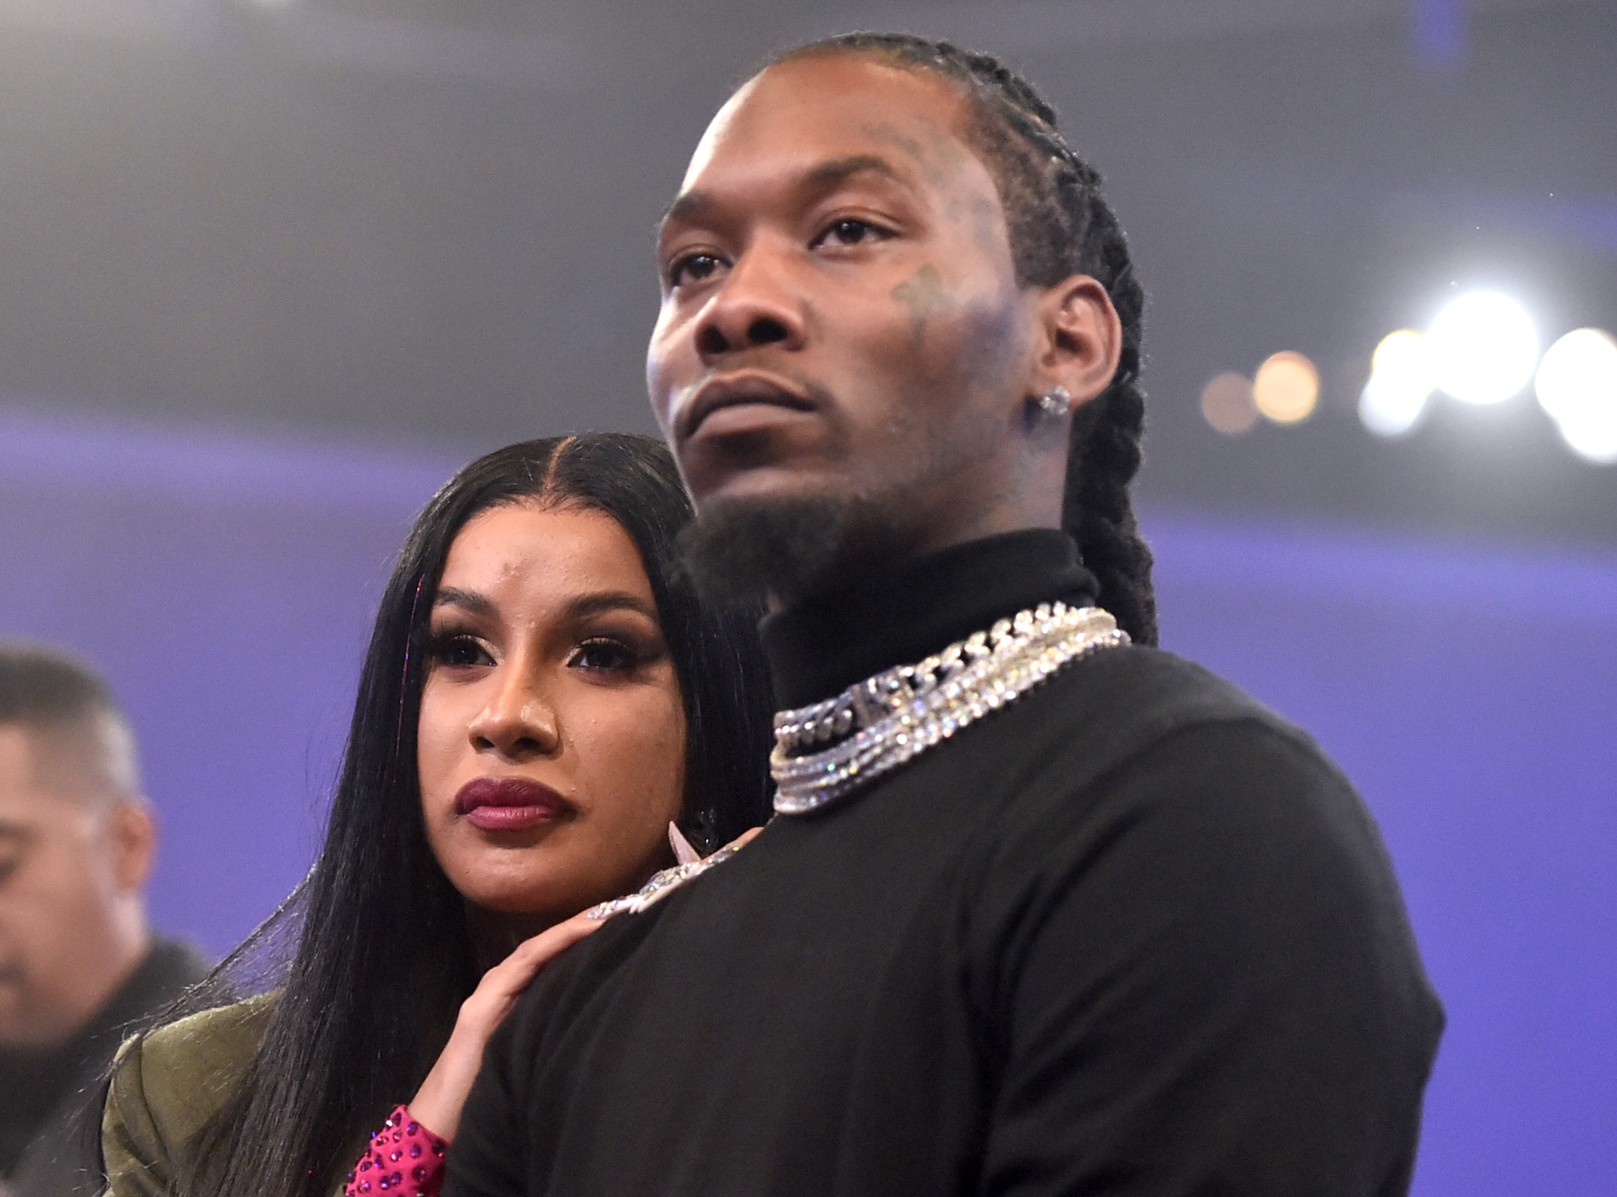 Offset & Cardi B Spotted Looking Somber Ahead Of Takeoff’s Memorial